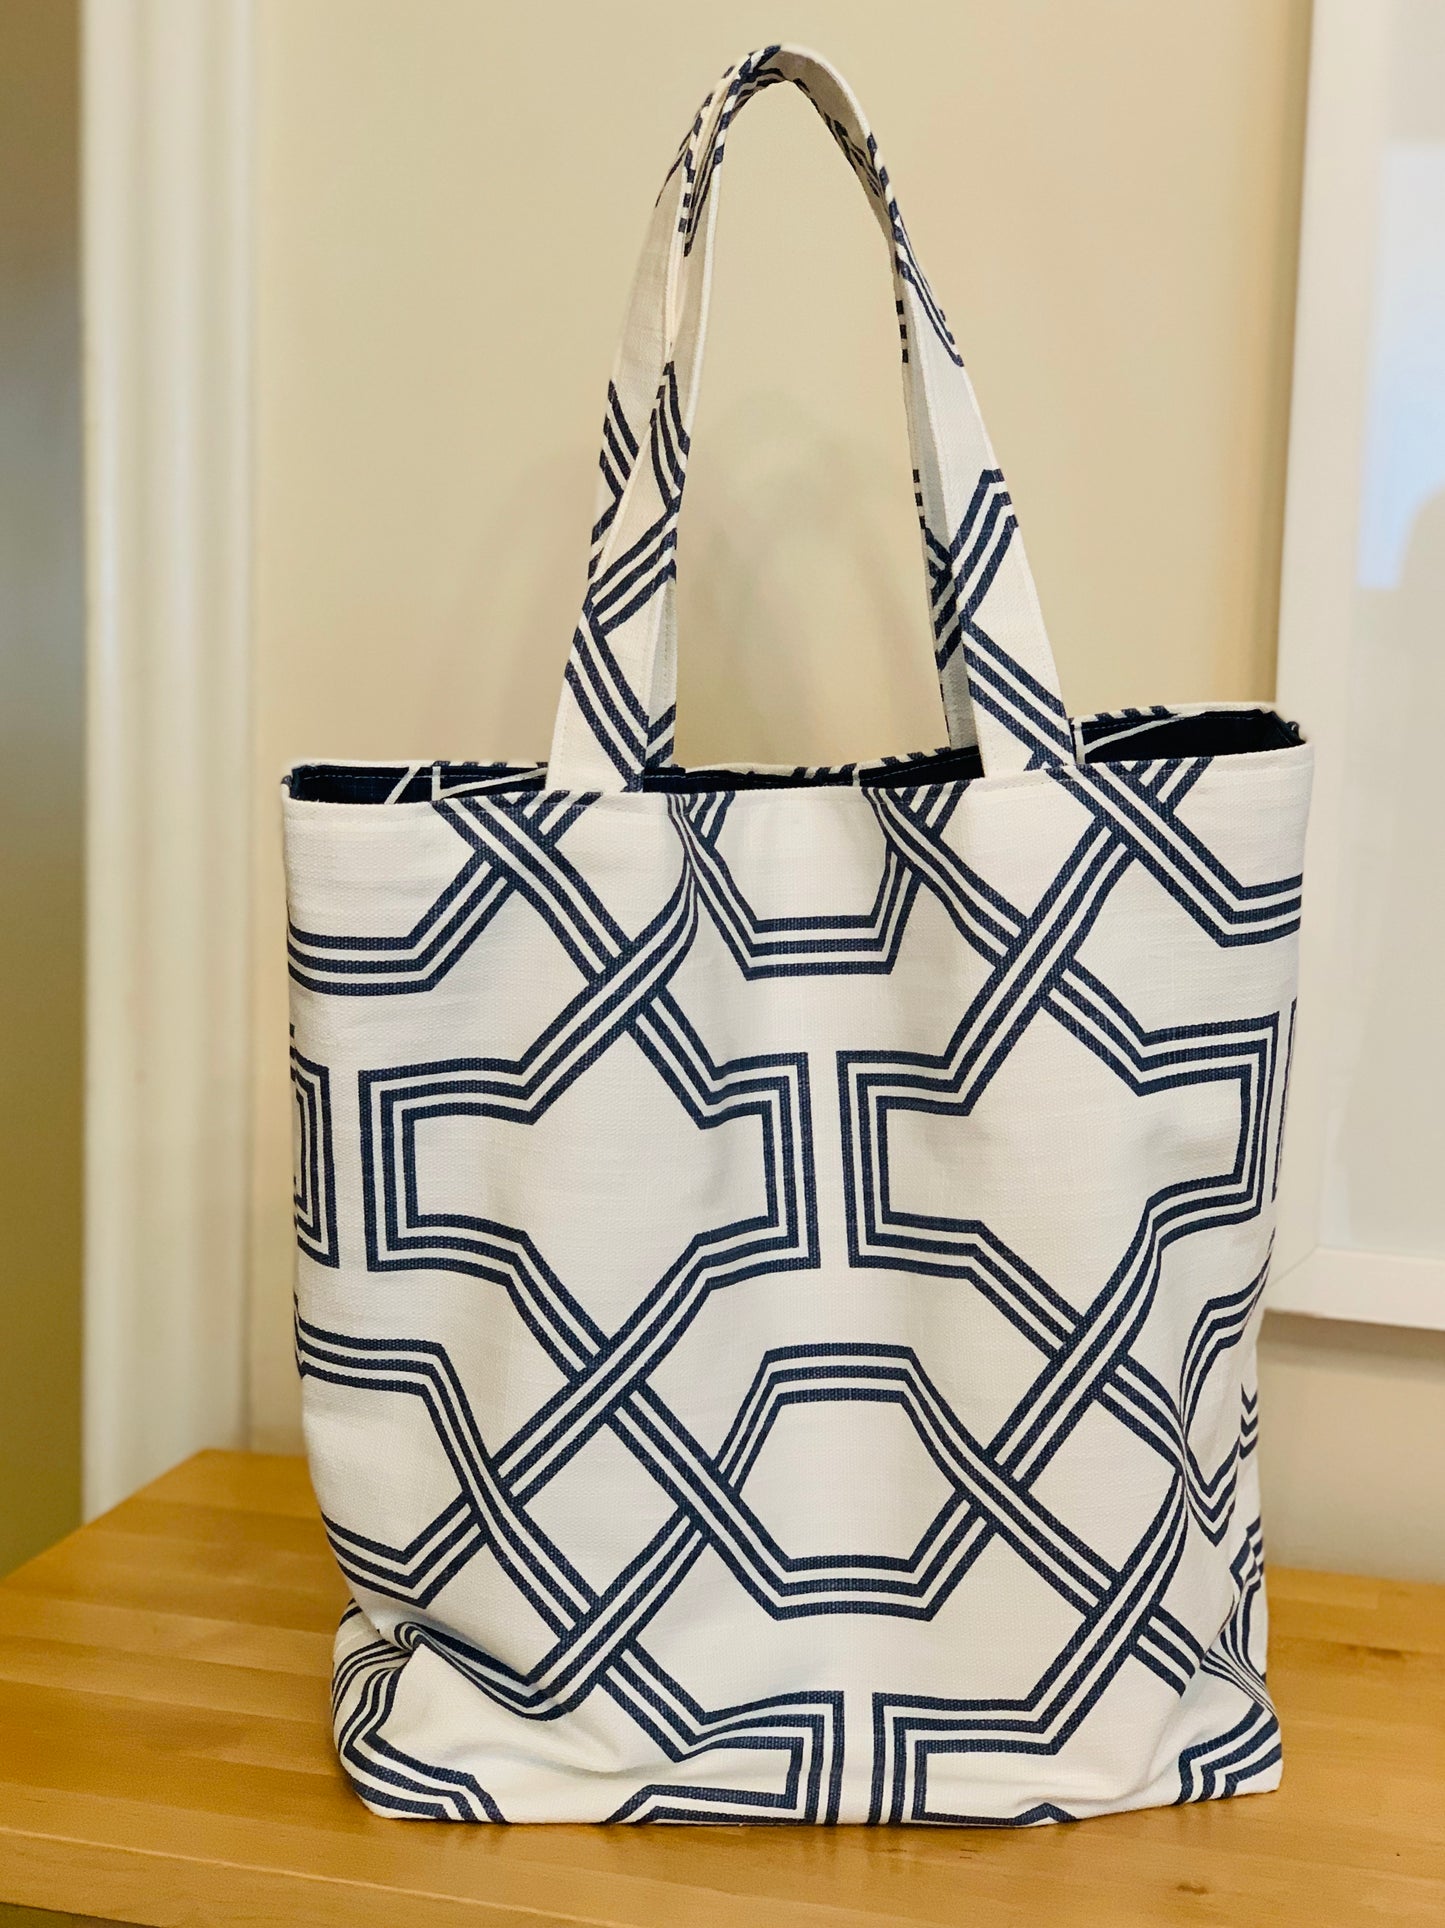 Tote Bag Hand Crafted of Premium Cotton Canvas Linen, Contrasting Lining and Interior Triple Pockets, Navy Blue Geometric Patterns